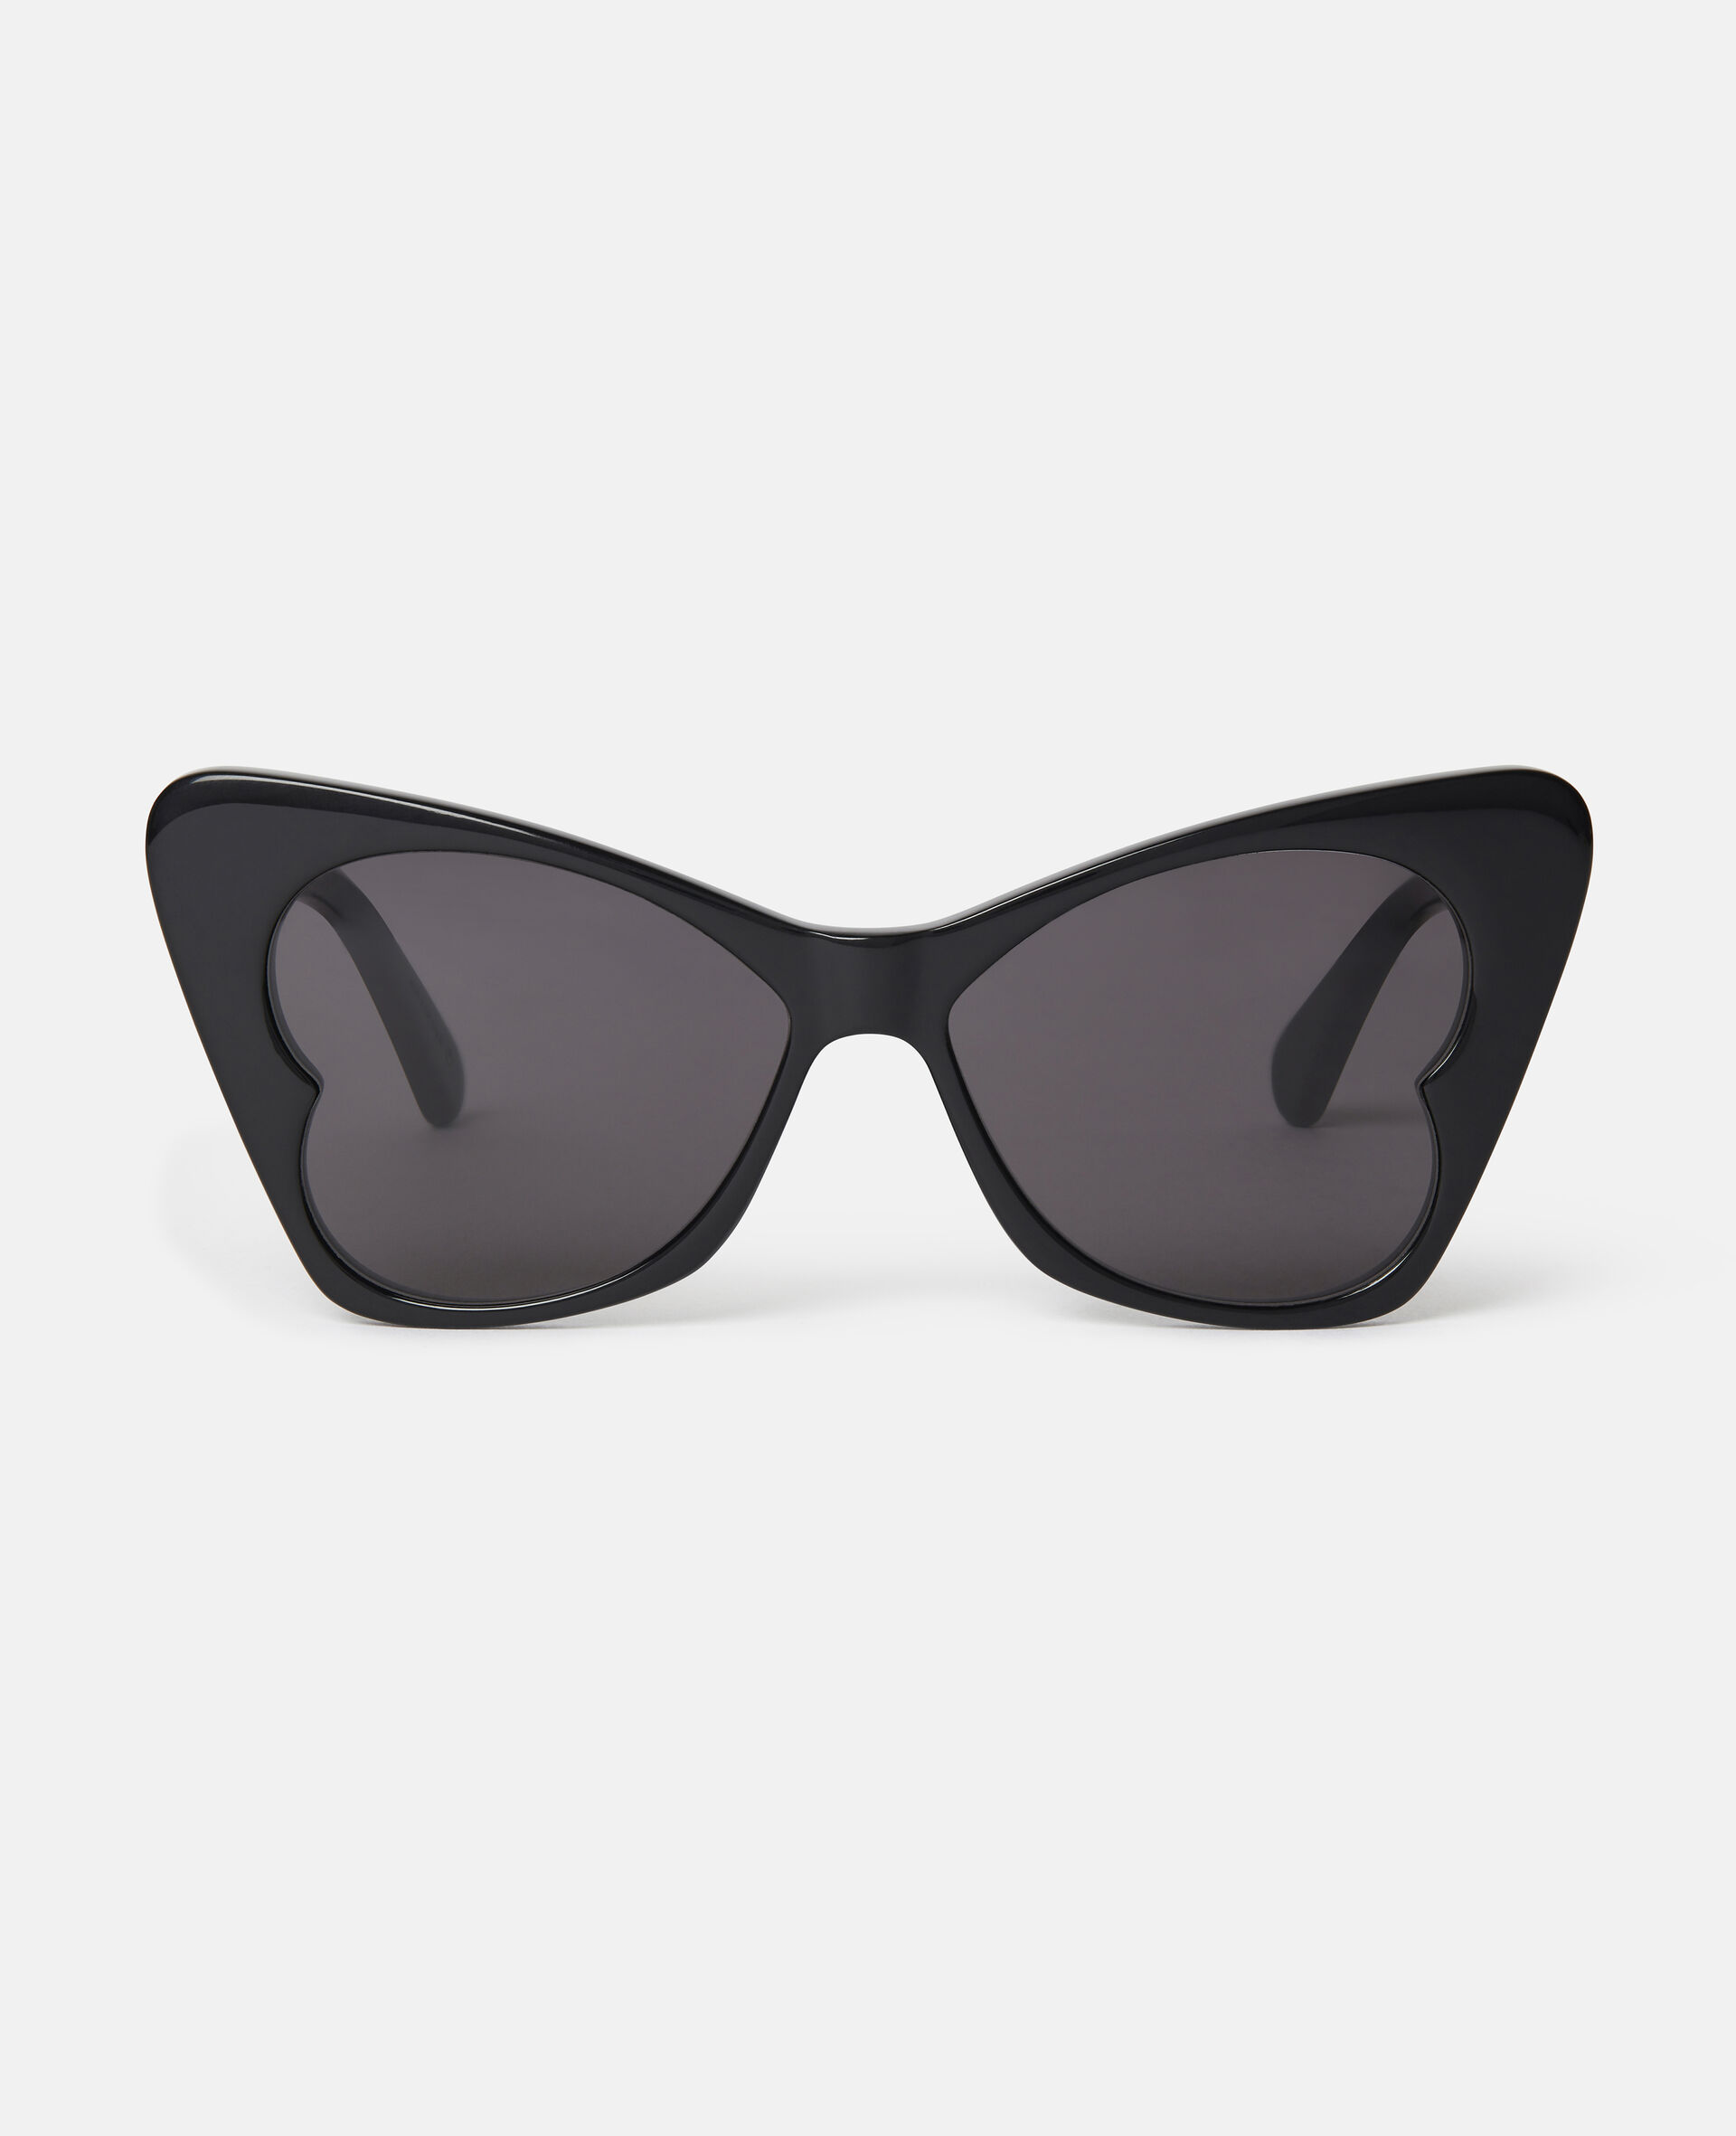 Butterfly Sunglasses-Black-large image number 0